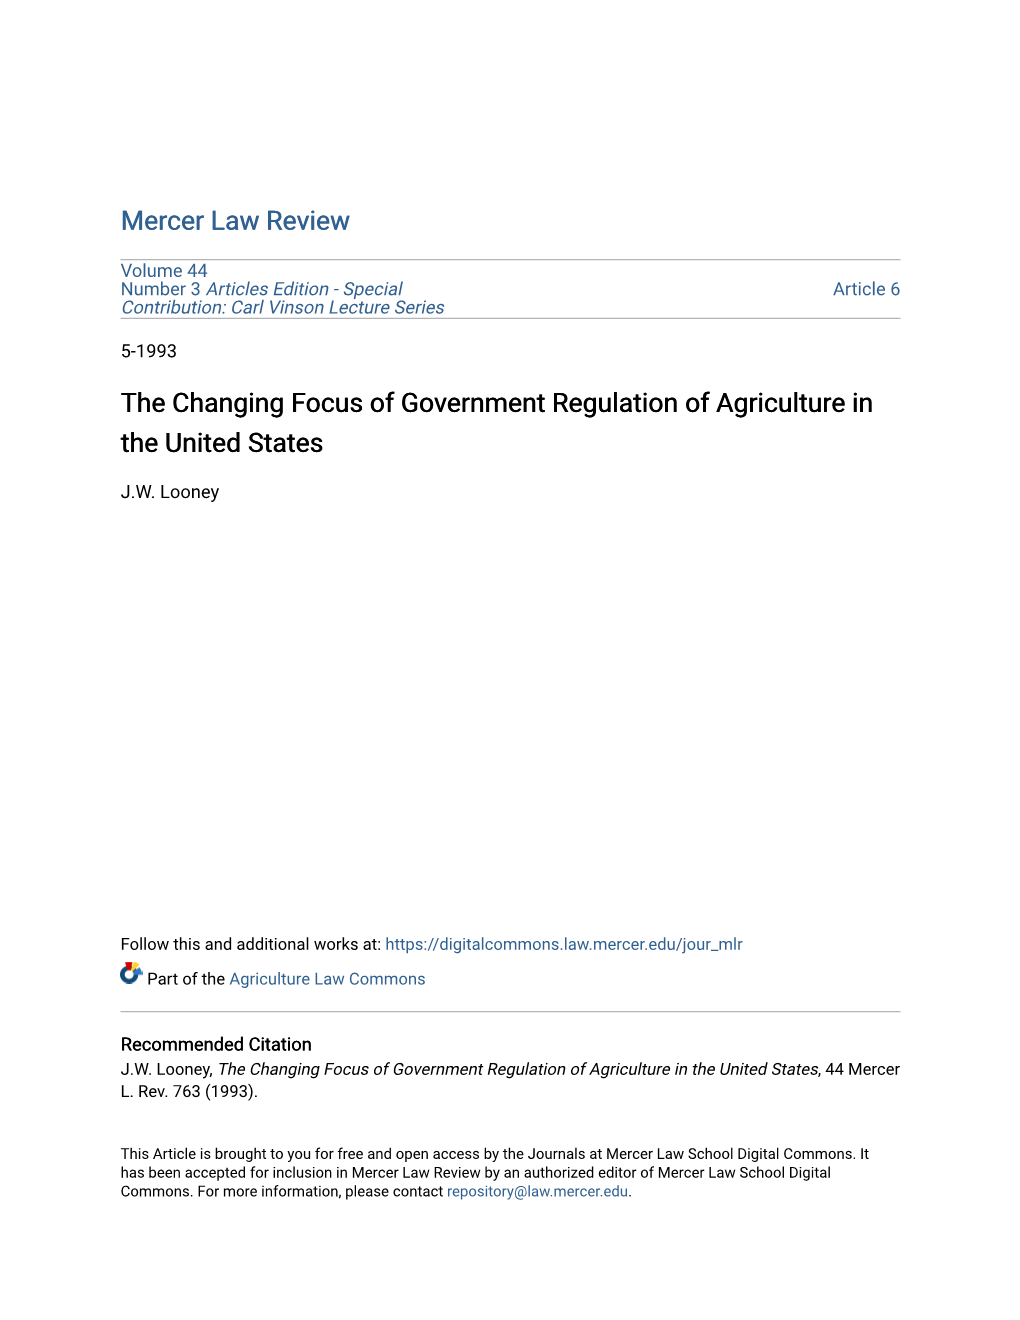 The Changing Focus of Government Regulation of Agriculture in the United States